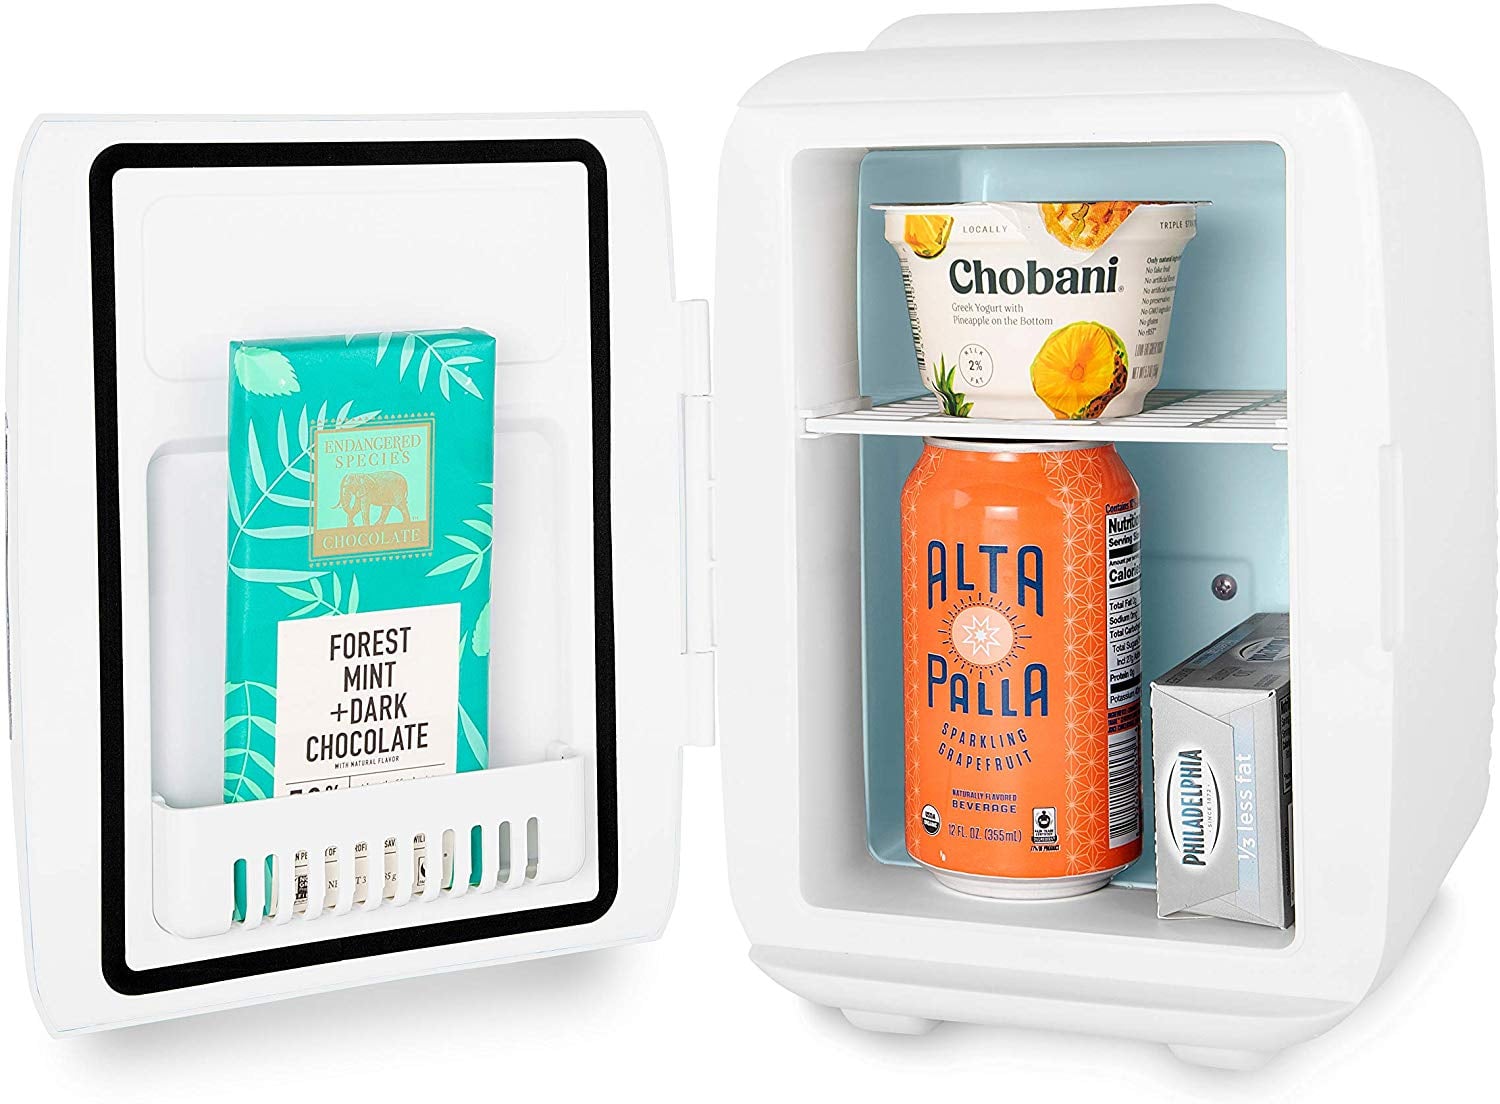 10 Tech Gifts For Teens: Cool Gadgets as Gift Ideas - Jackery